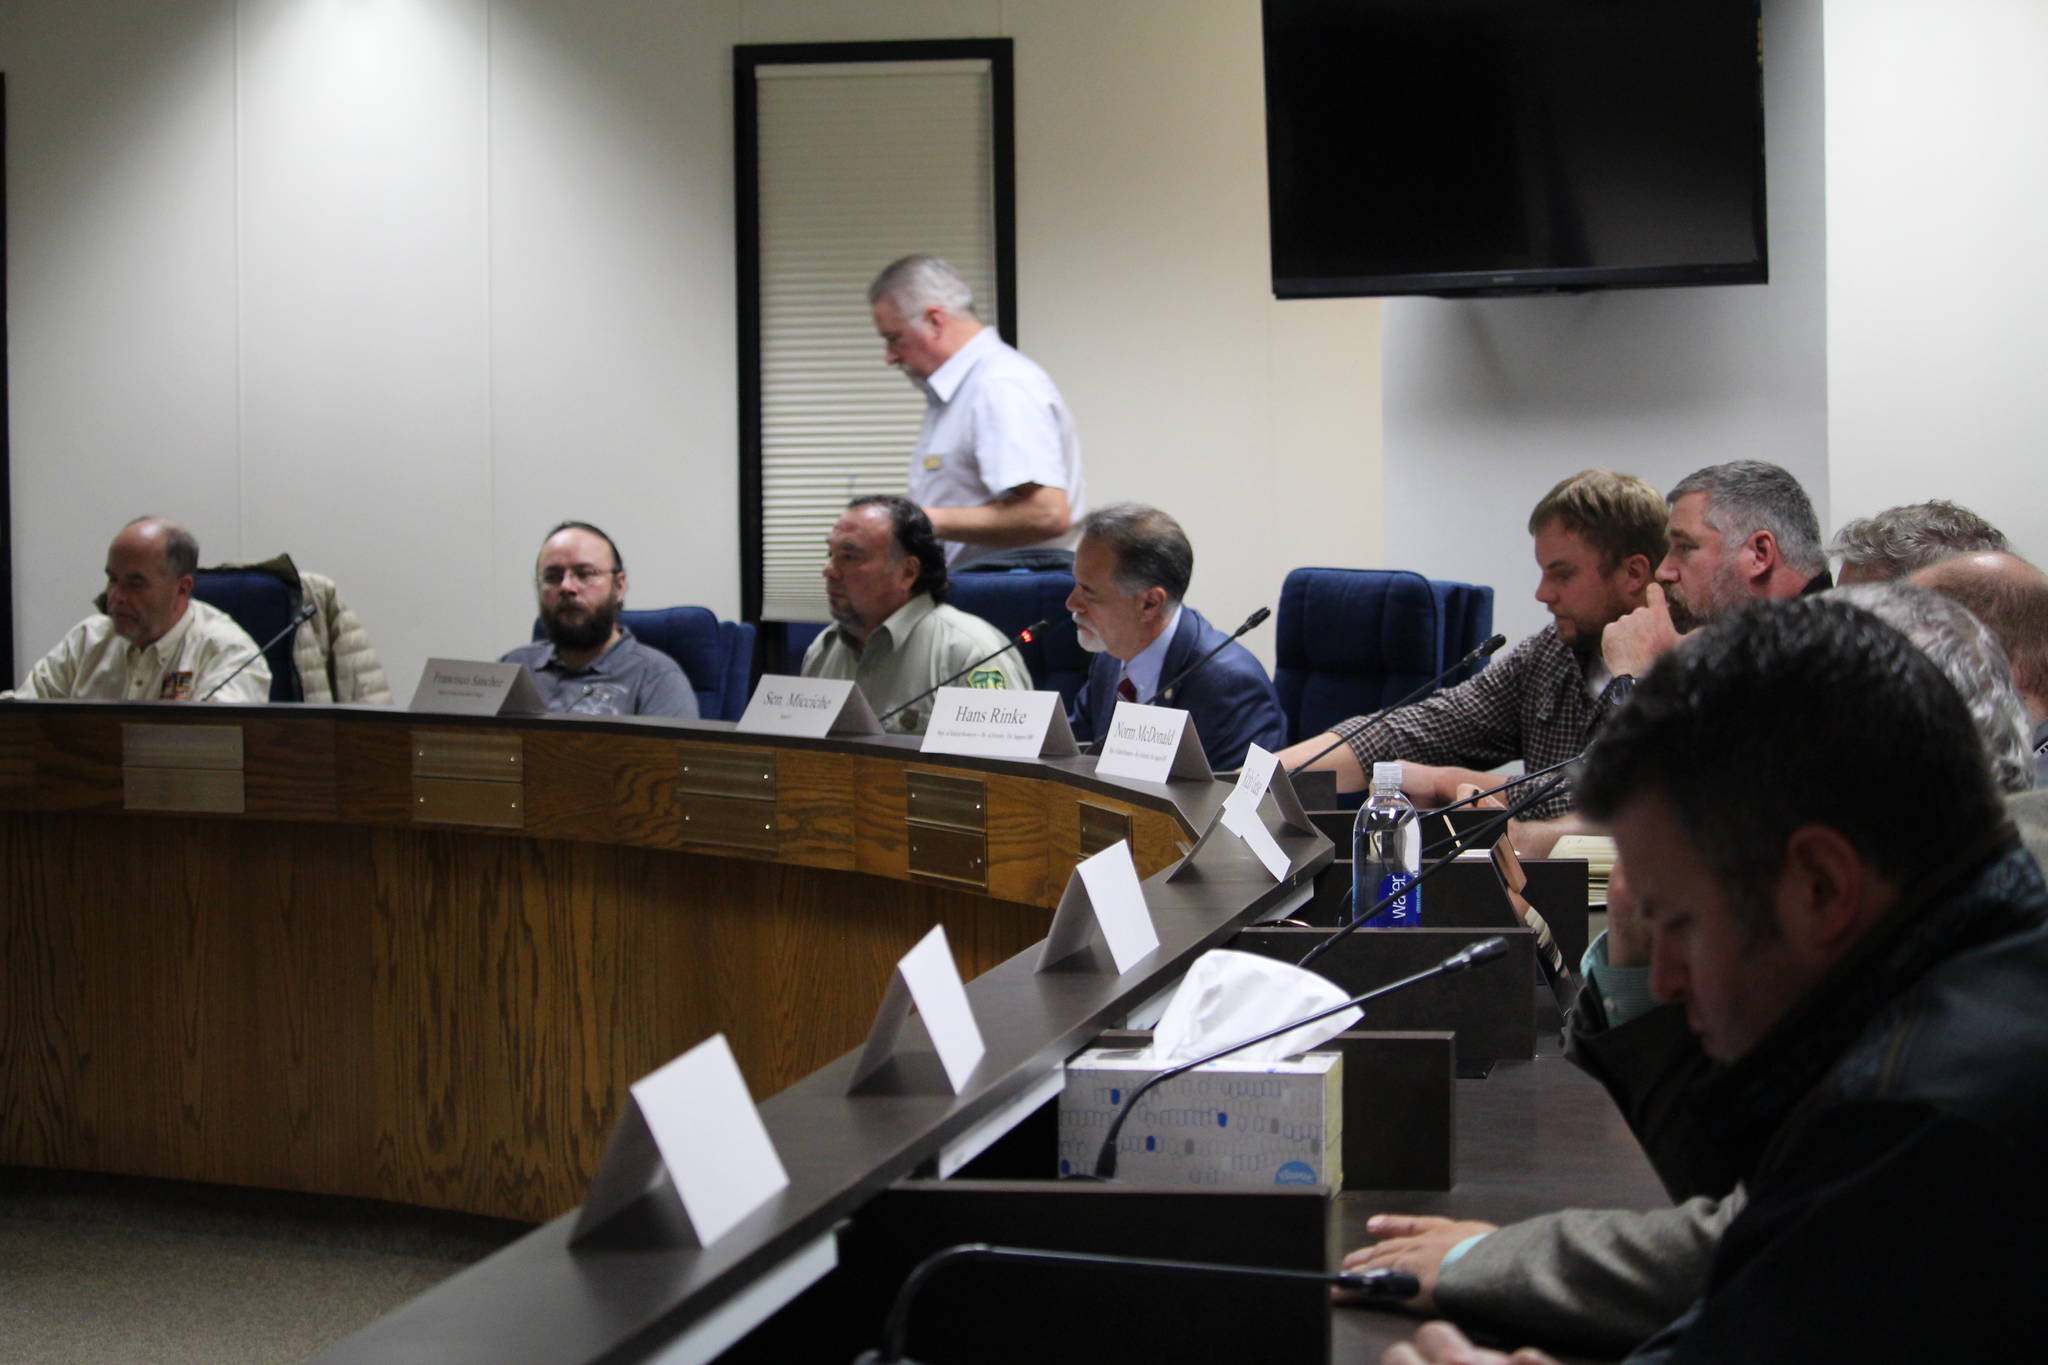 Representatives from local, state and federal agencies participate in a discussion about the Swan Lake Fire at the Kenai Peninsula Borough Assembly Chambers in Soldotna, Alaska on Nov. 13, 2019. (Photo by Brian Mazurek/Peninsula Clarion)